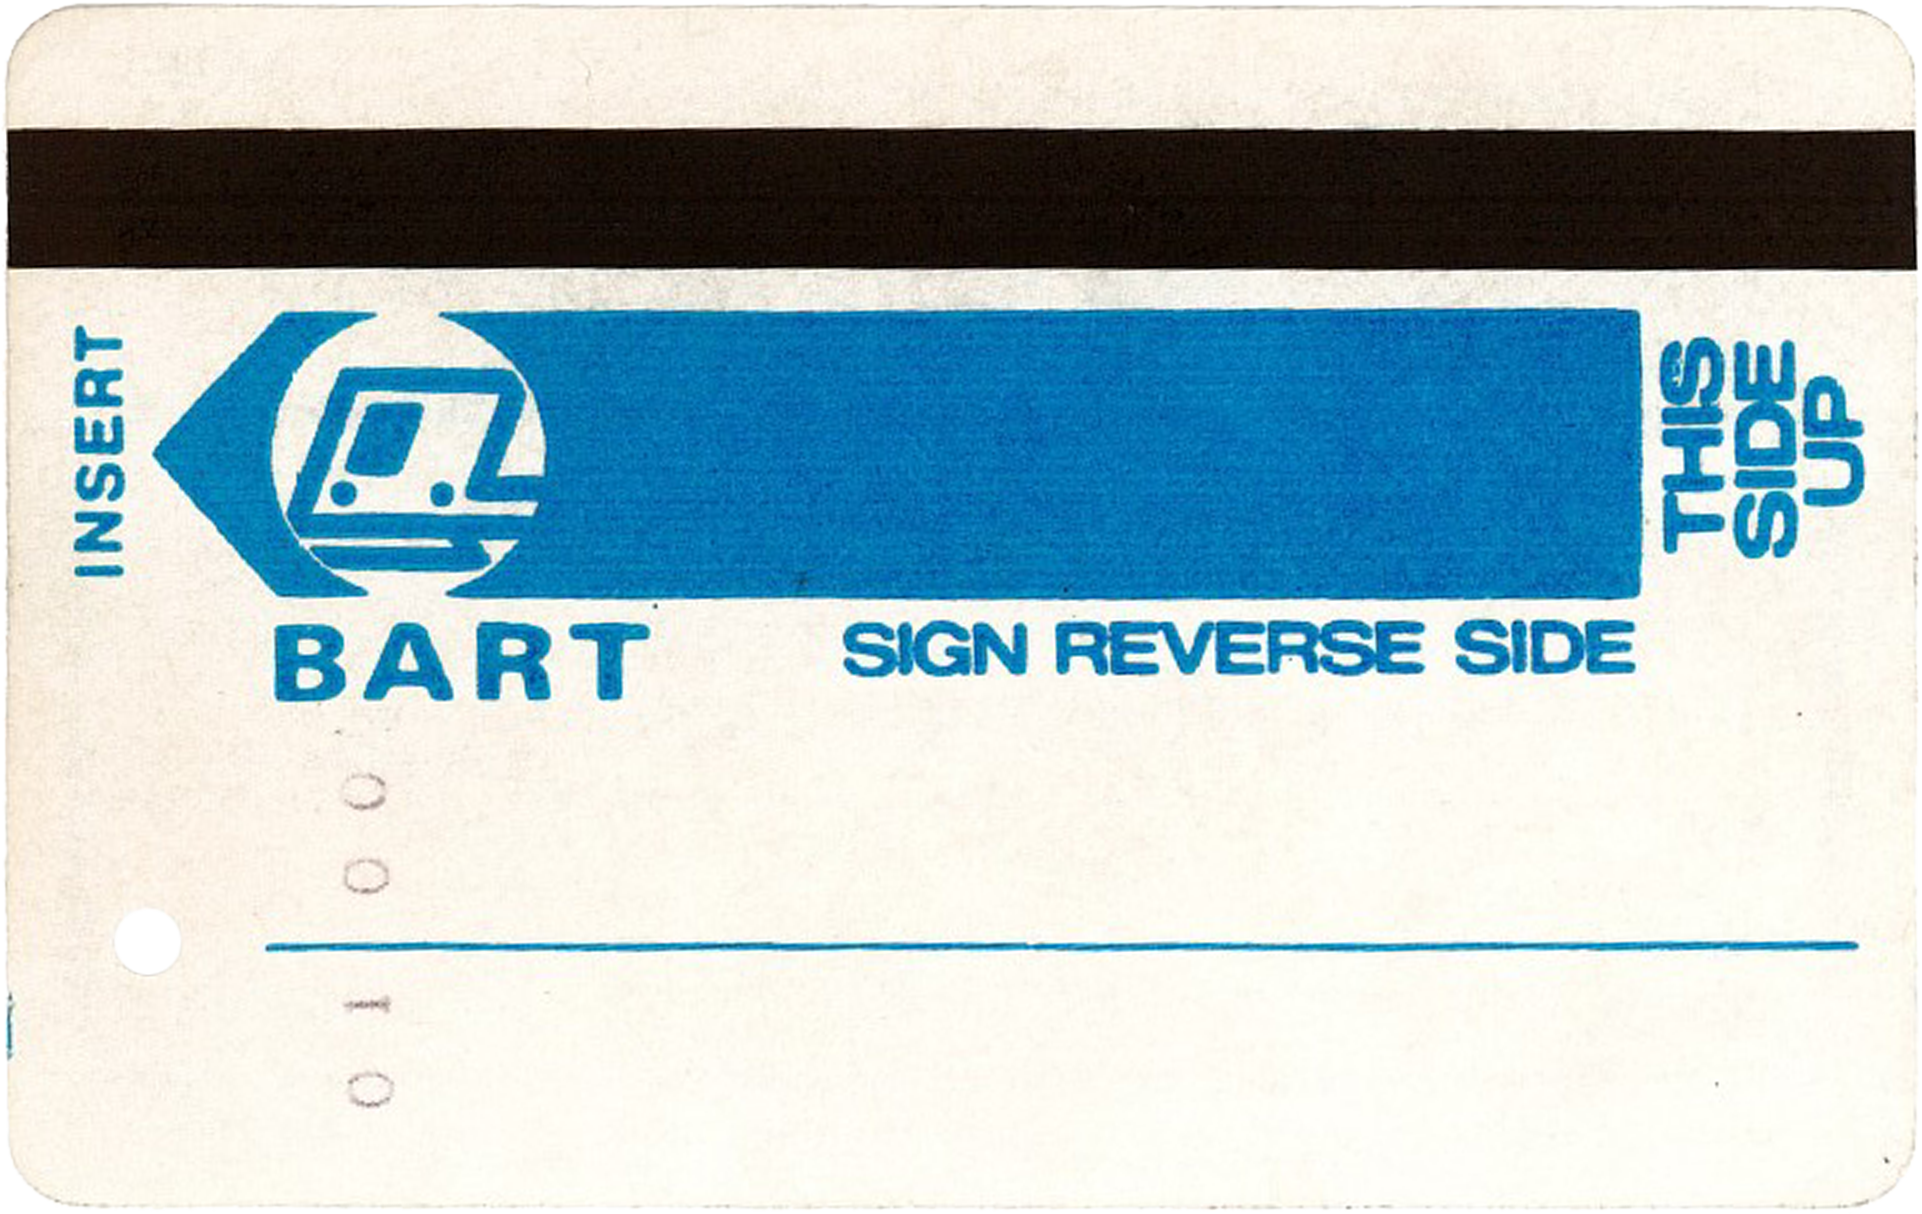 BART tickets through the years